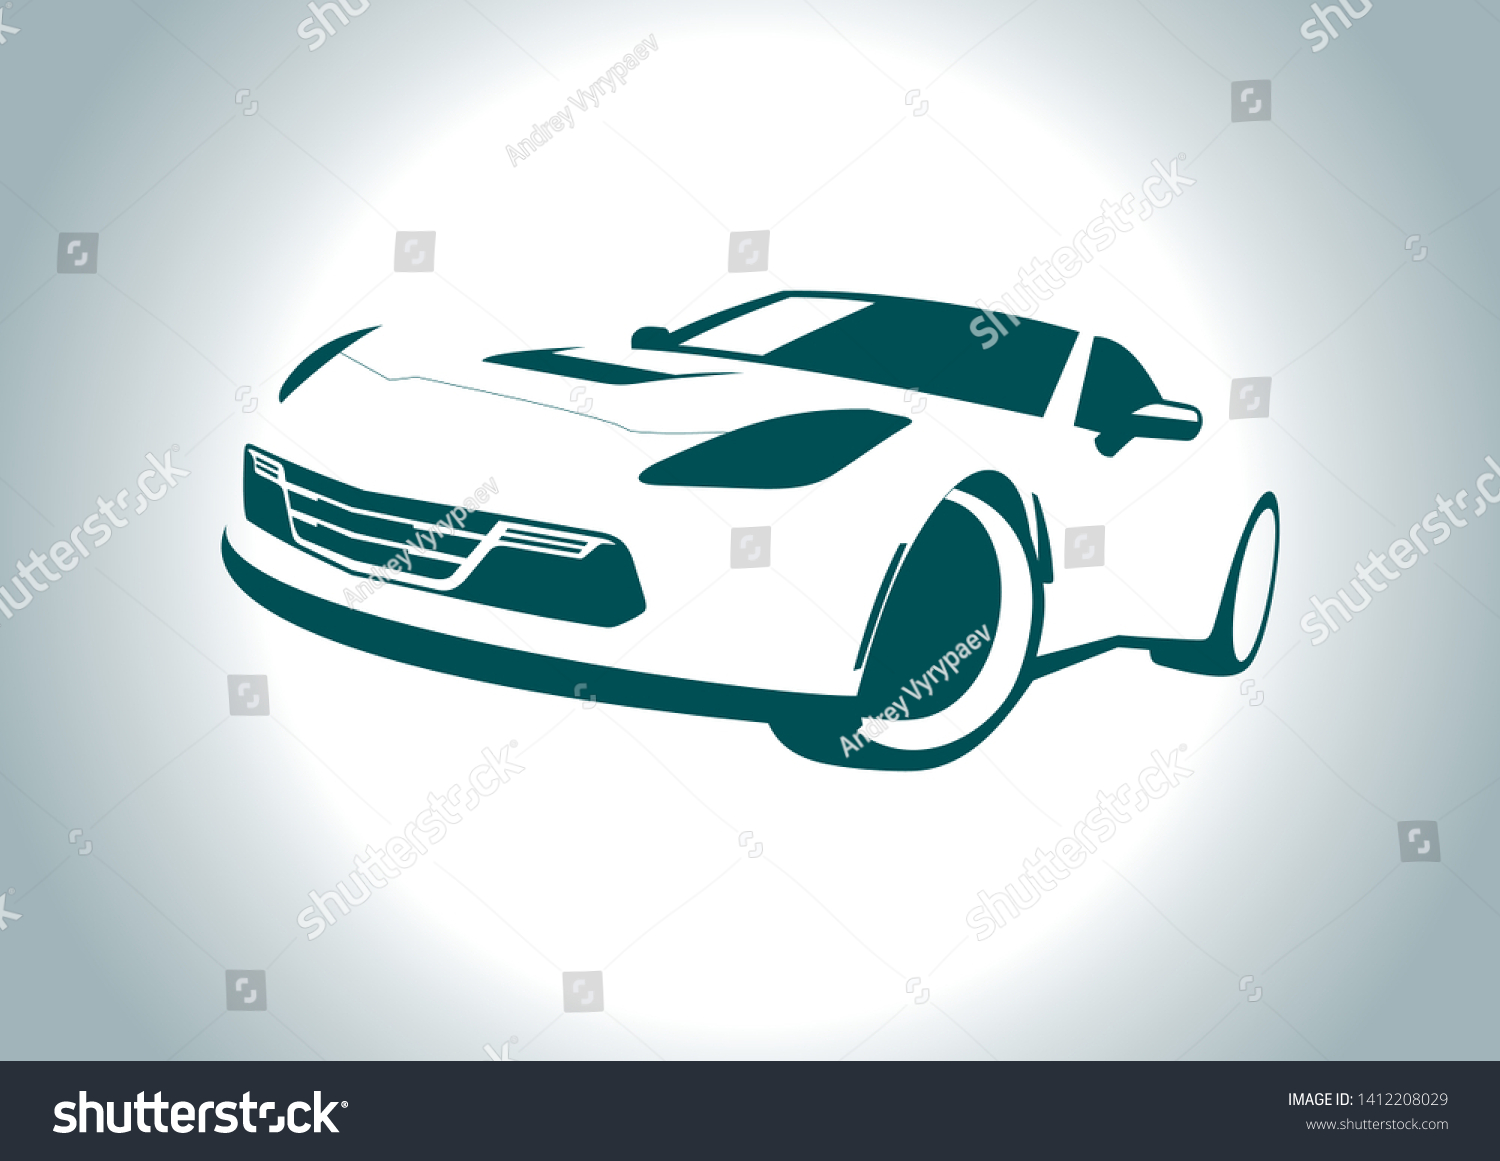 SVG of vector layout of the silhouette of a sports car. Chevrolet Corvette. svg